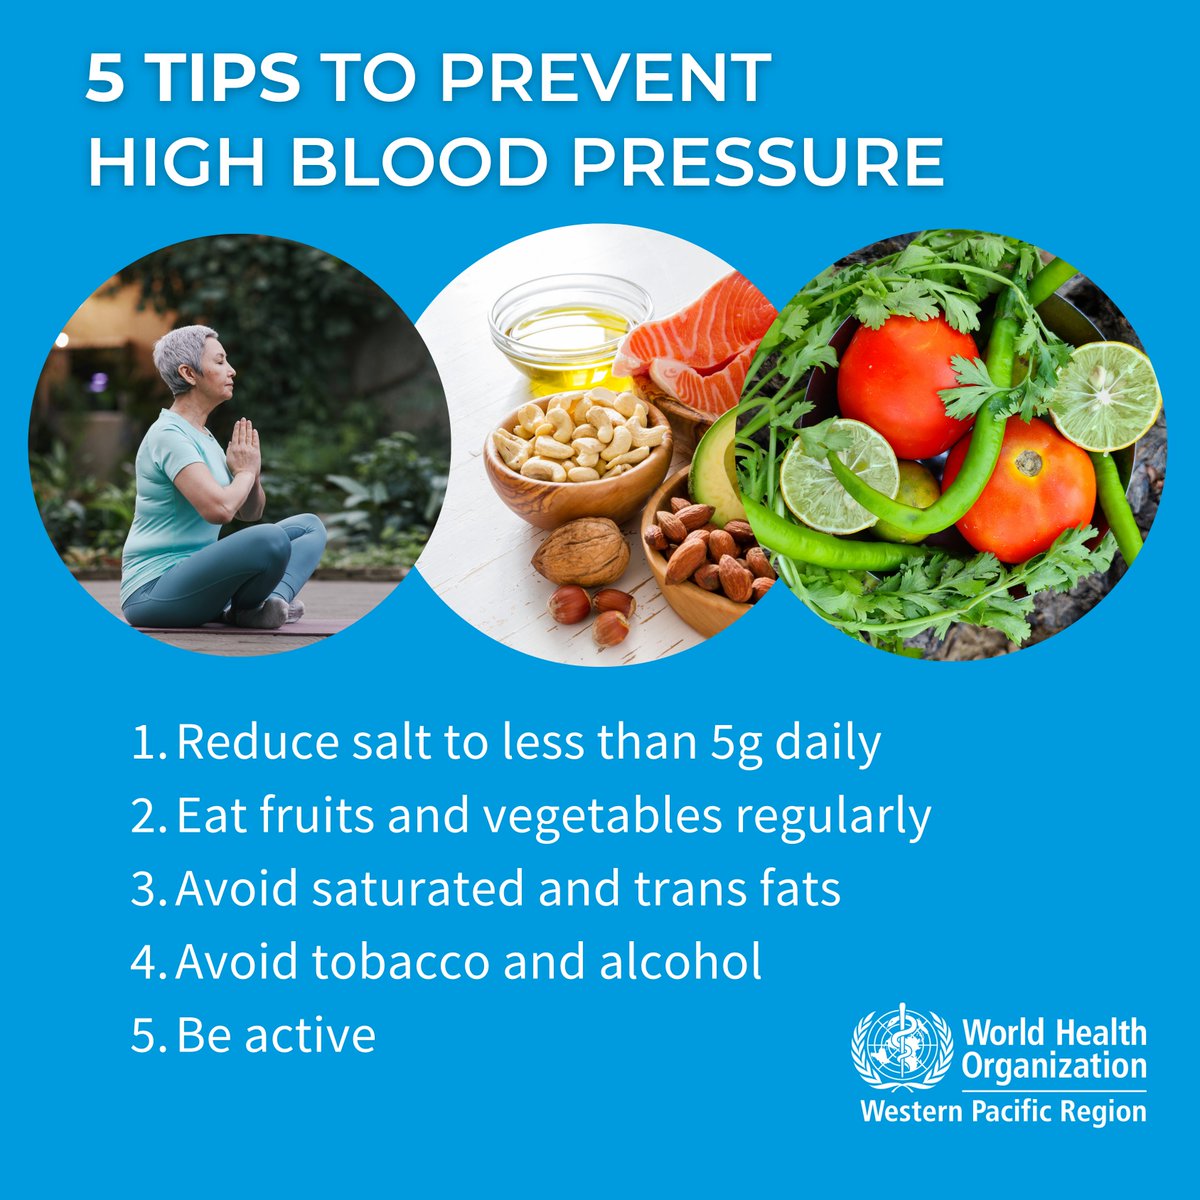 #Hypertension or high blood pressure can cause health complications if it is not controlled. Here are tips to prevent it ⤵️ ☑ Reduce salt to less than 5g daily ☑ Increase fruits and vegetables intake ☑ Avoid saturated and trans fats ☑ Avoid tobacco and alcohol ☑ Keep active